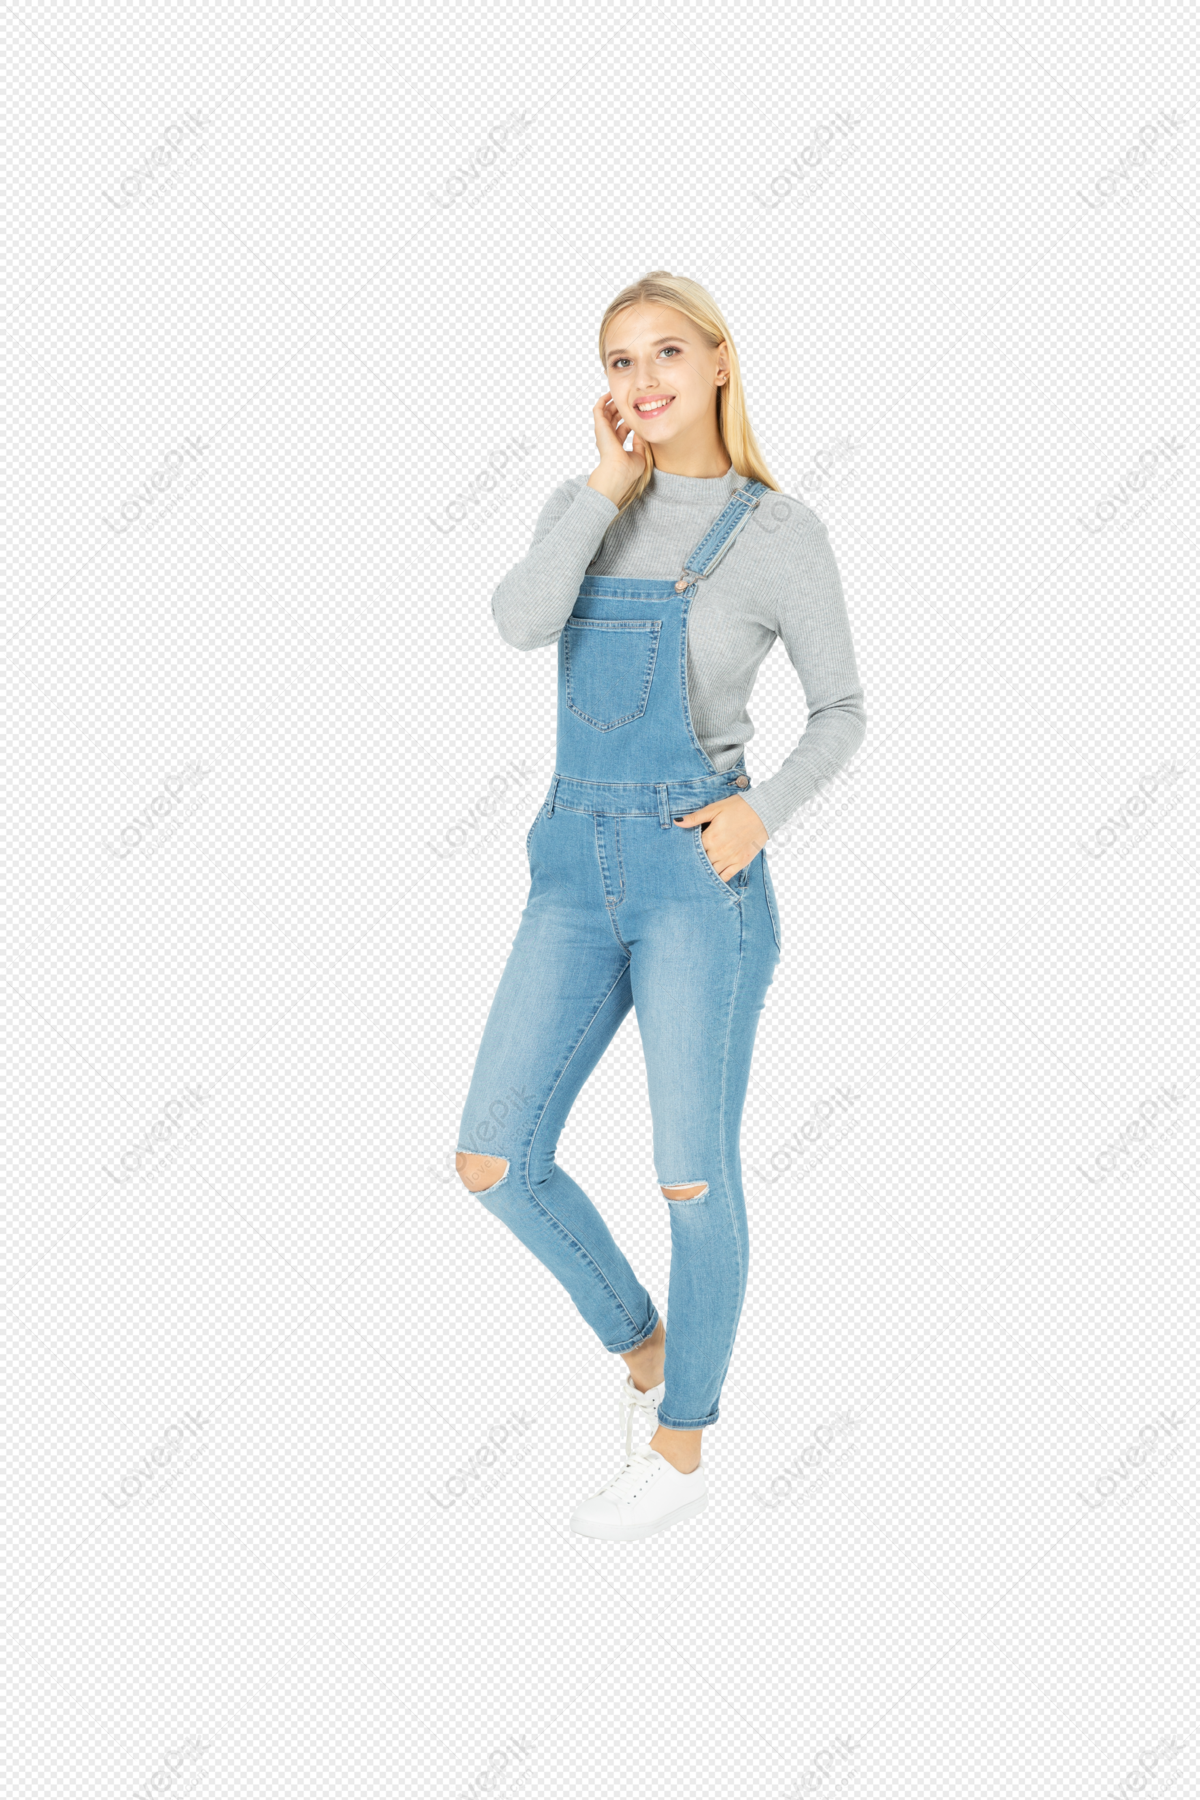 Collection of Women S Jeans in Different Poses Stock Image - Image of  perfect, model: 44144385